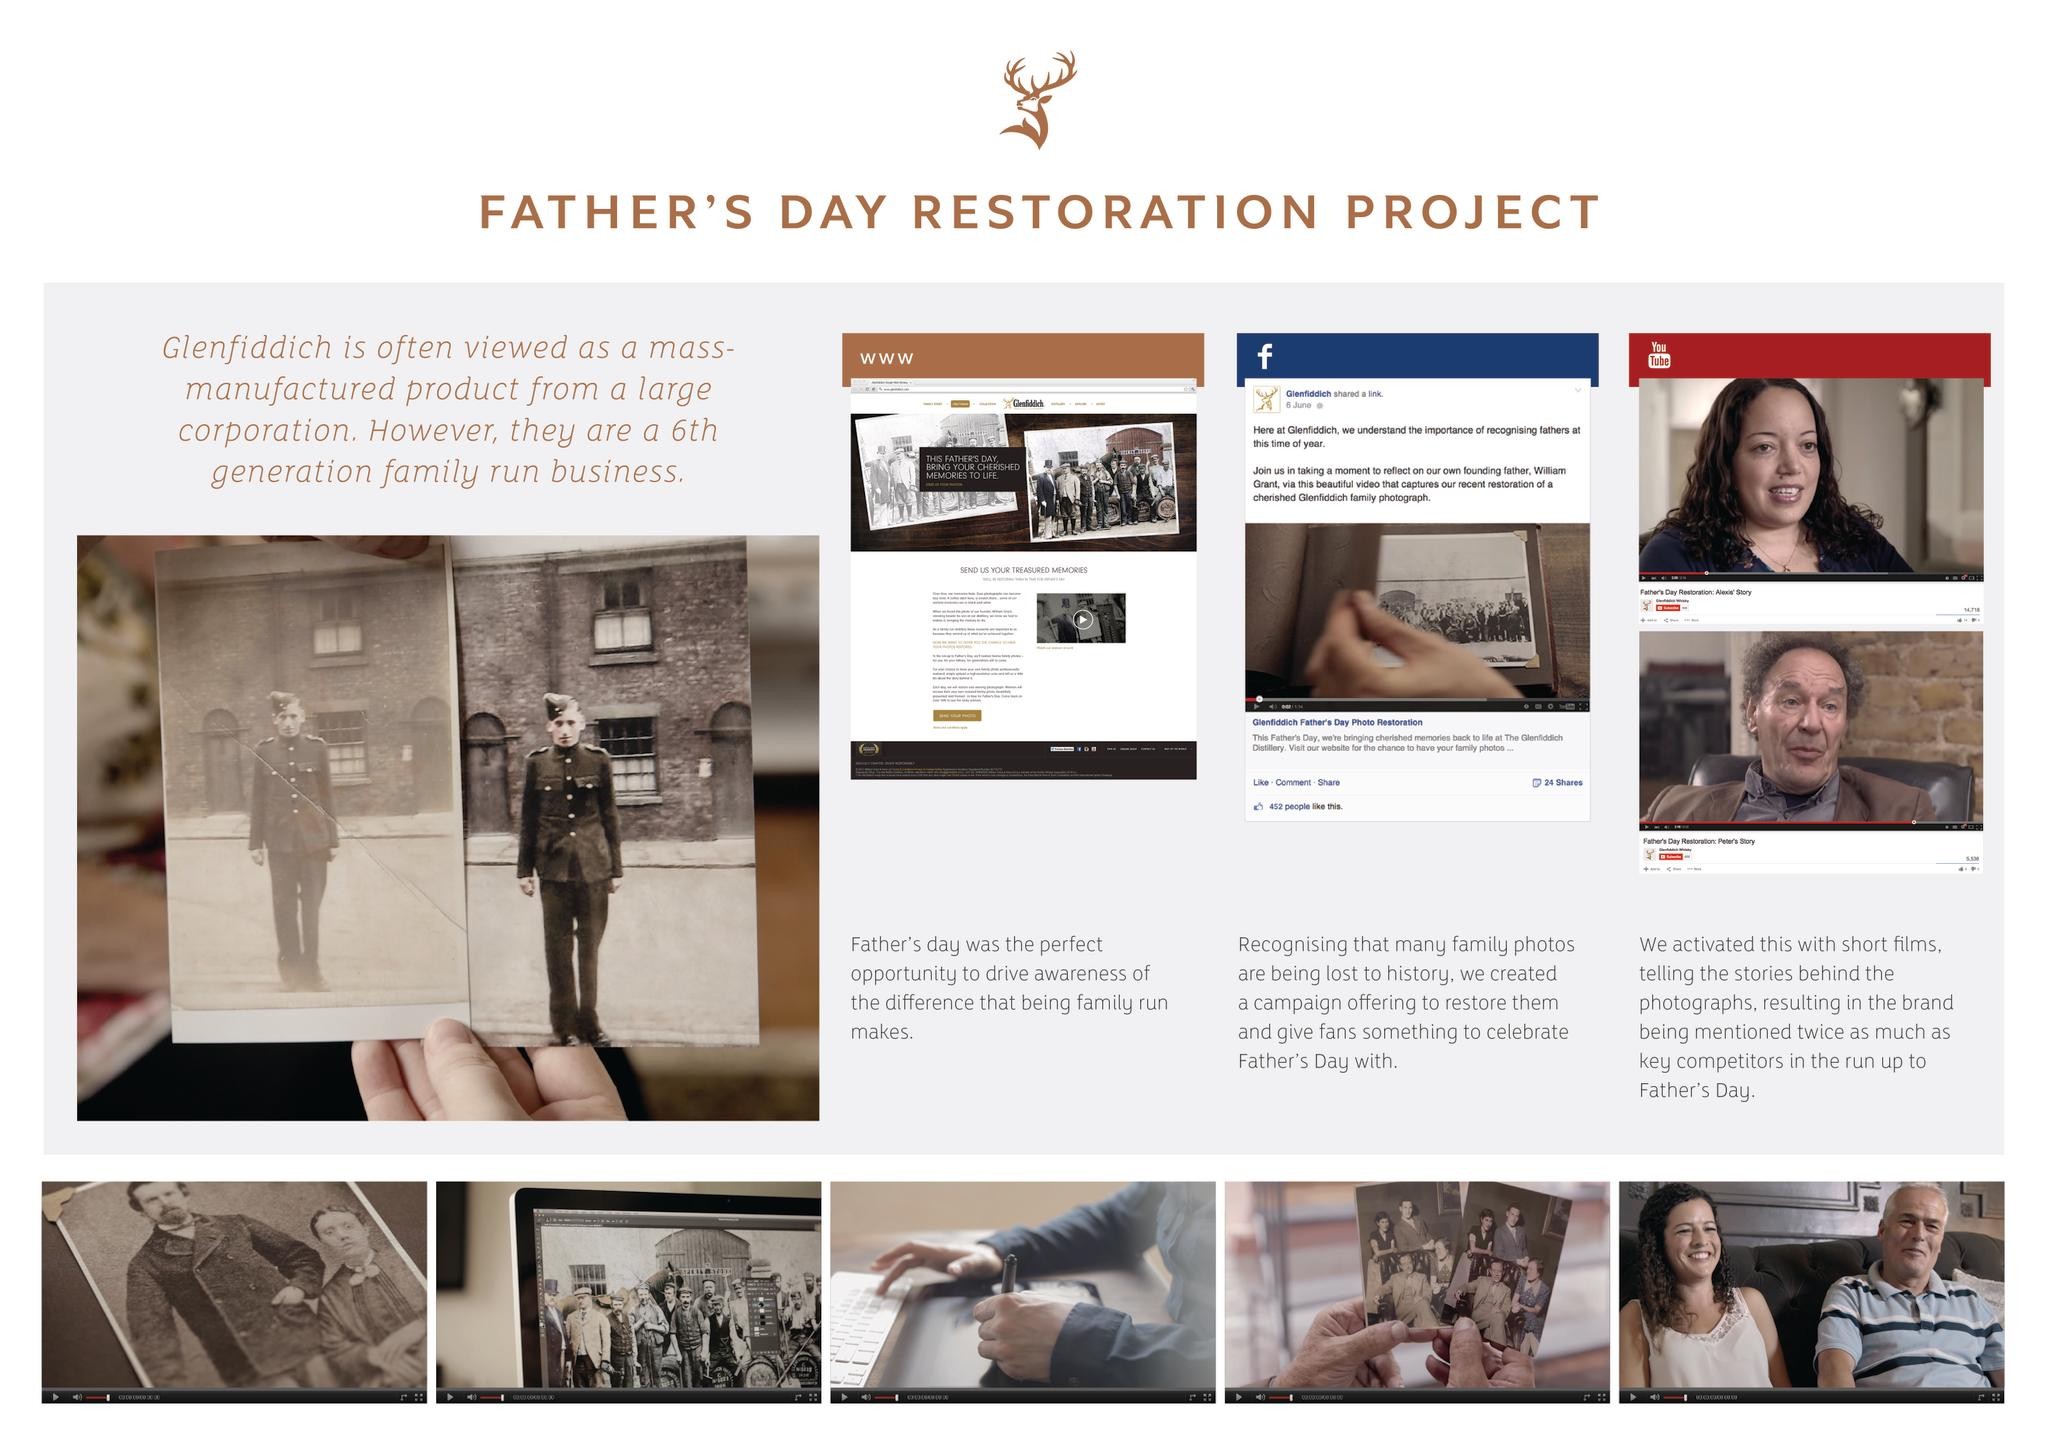 GLENFIDDICH: FATHER'S DAY RESTORATION PROJECT